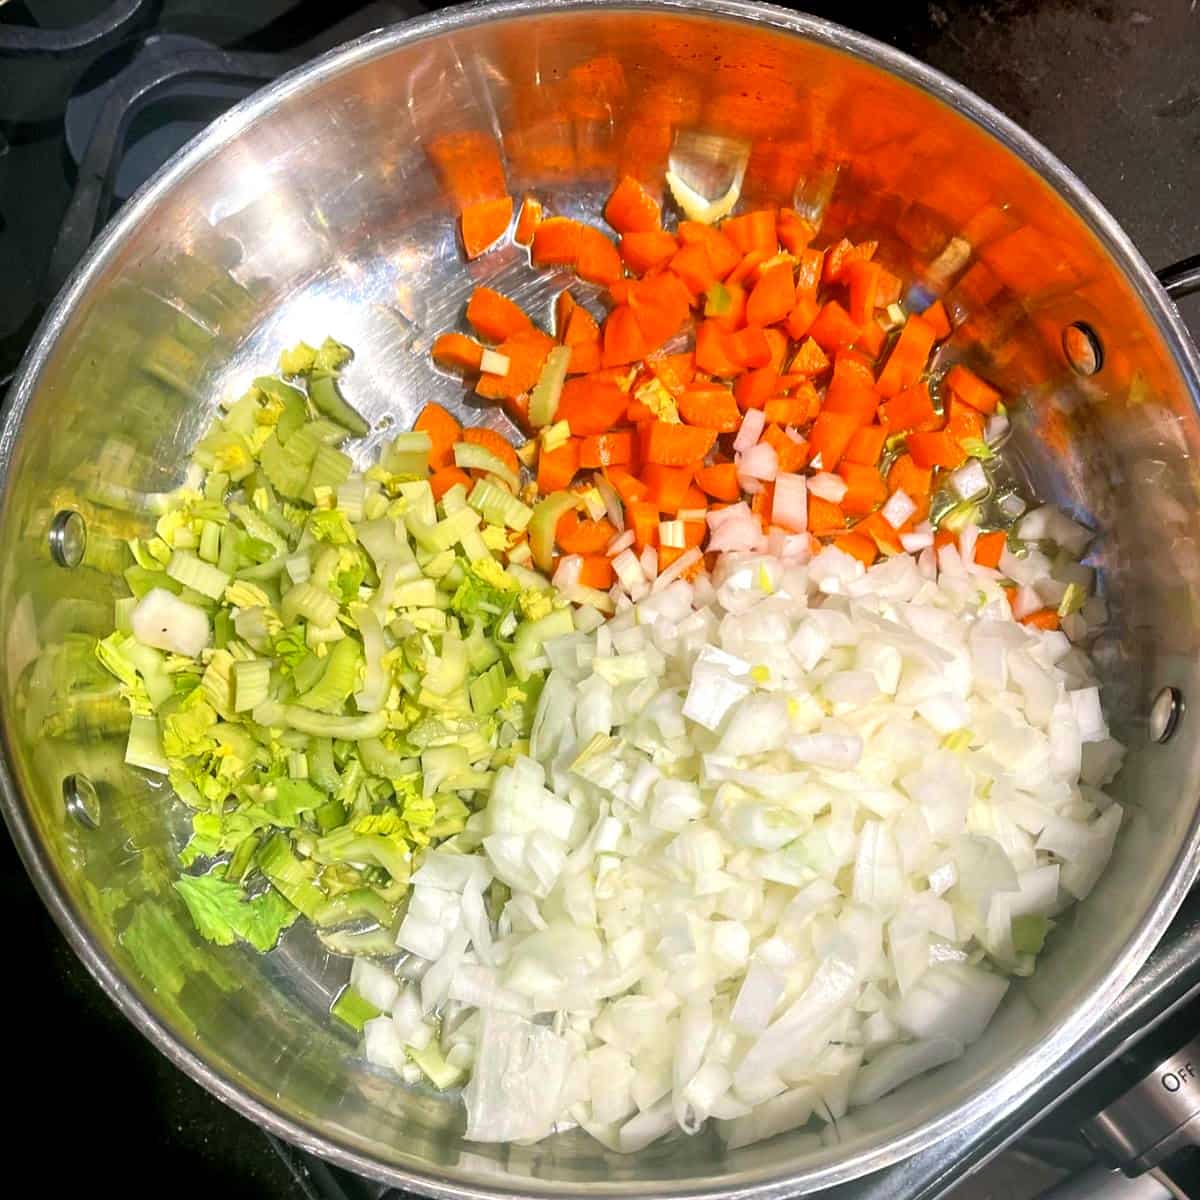 Celery, carrots and onions added to skillet.